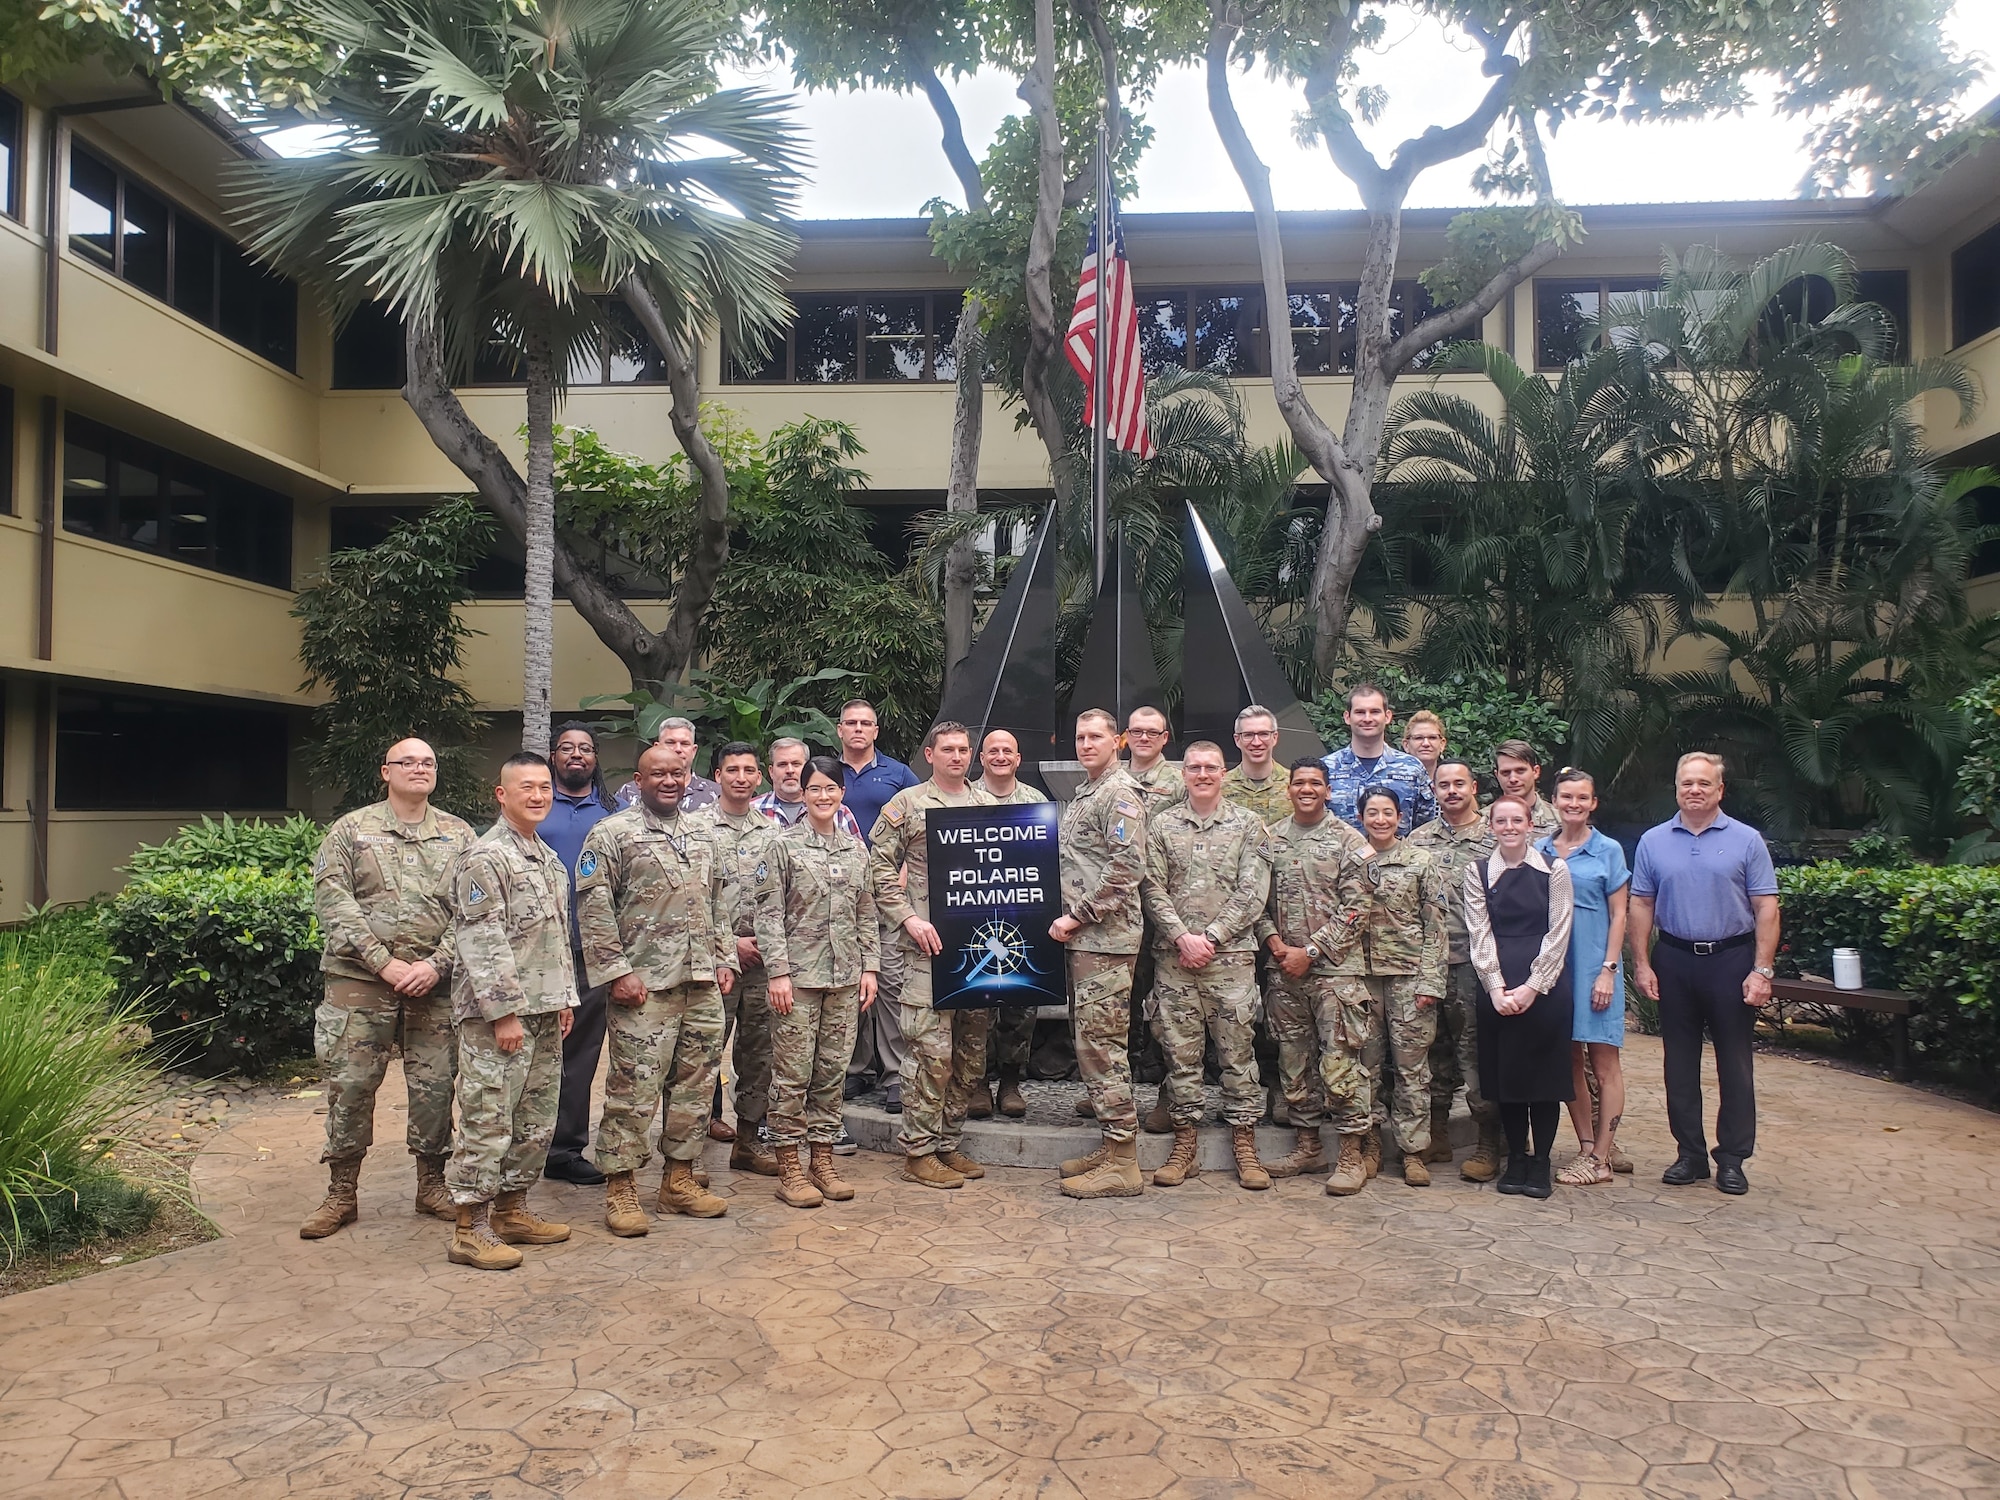 Members from the 392d Combat Training Squadron and participants of POLARIS HAMMER 23 exercise pose for a group photo at Joint Base Pearl Harbor-Hickam, Hawaii, Feb. 7, 2023. POLARIS HAMMER is the first exercise in the Department of Defense exclusively focused on the command and control of space warfighting forces. Initially developed as a command post exercise, the first iteration of POLARIS HAMMER was a table-top exercise in preparation for a full command post exercise in fiscal year 2024. (Courtesy photo)